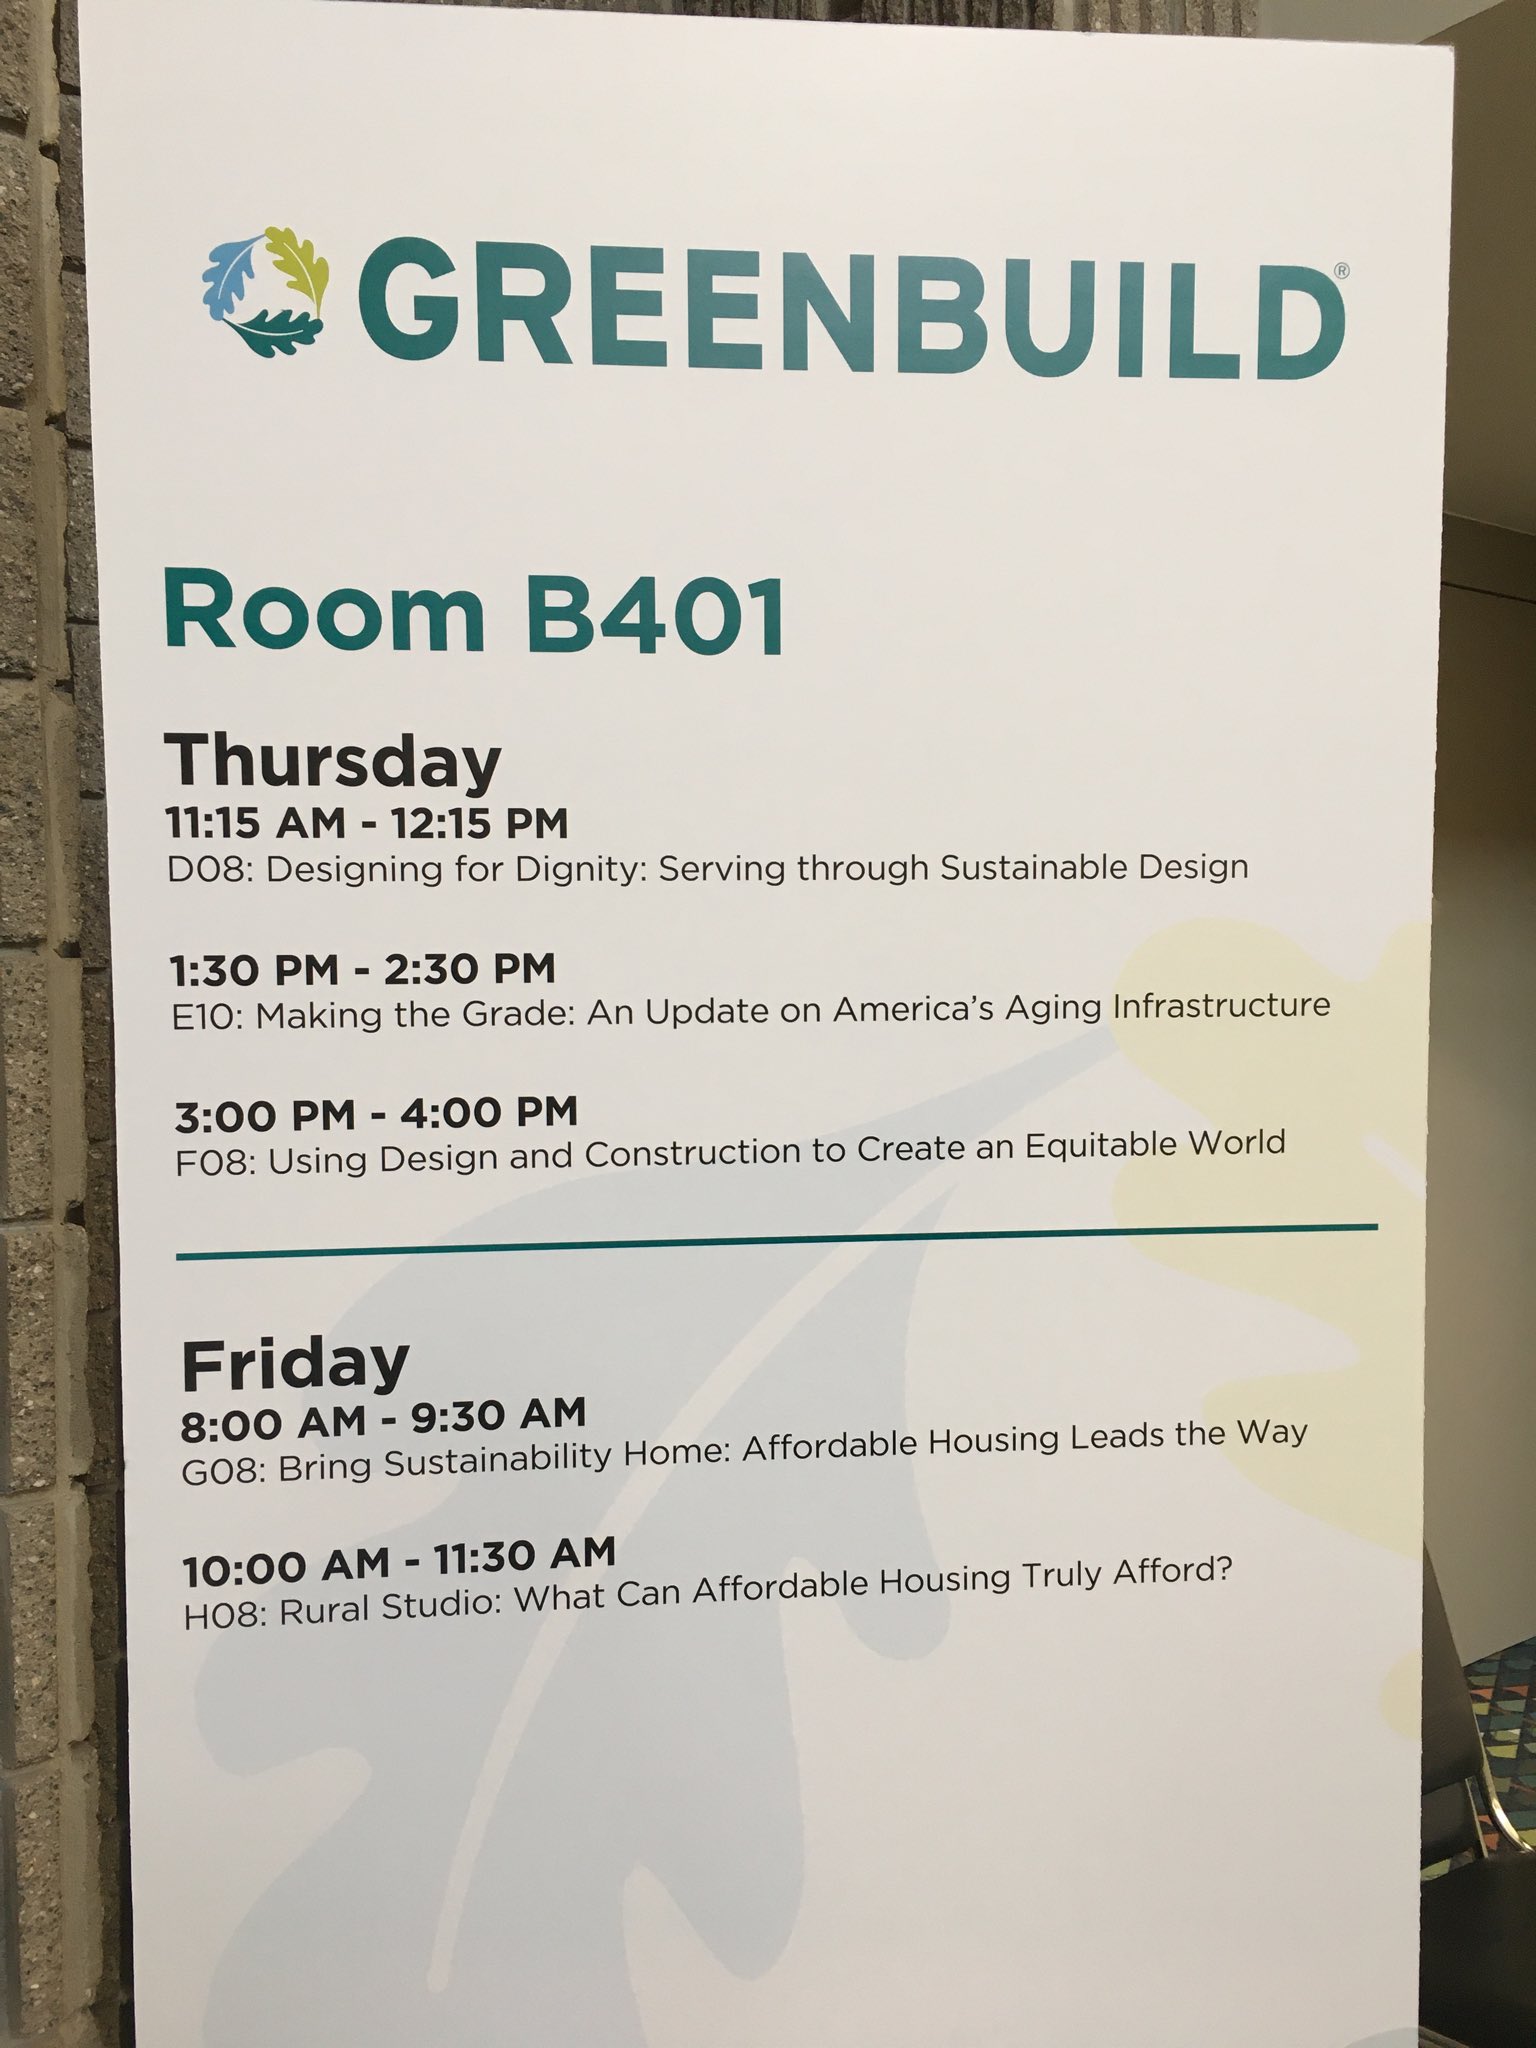 Lisa Lettieri on X: Alana Spencer and Gabriella Henkels with #Vanderweil  Engineers and Lisa Lettieri with #Rust Orling Architecture are speaking at  #Greenbuild19. Our topic is Designing with Dignity.   / X